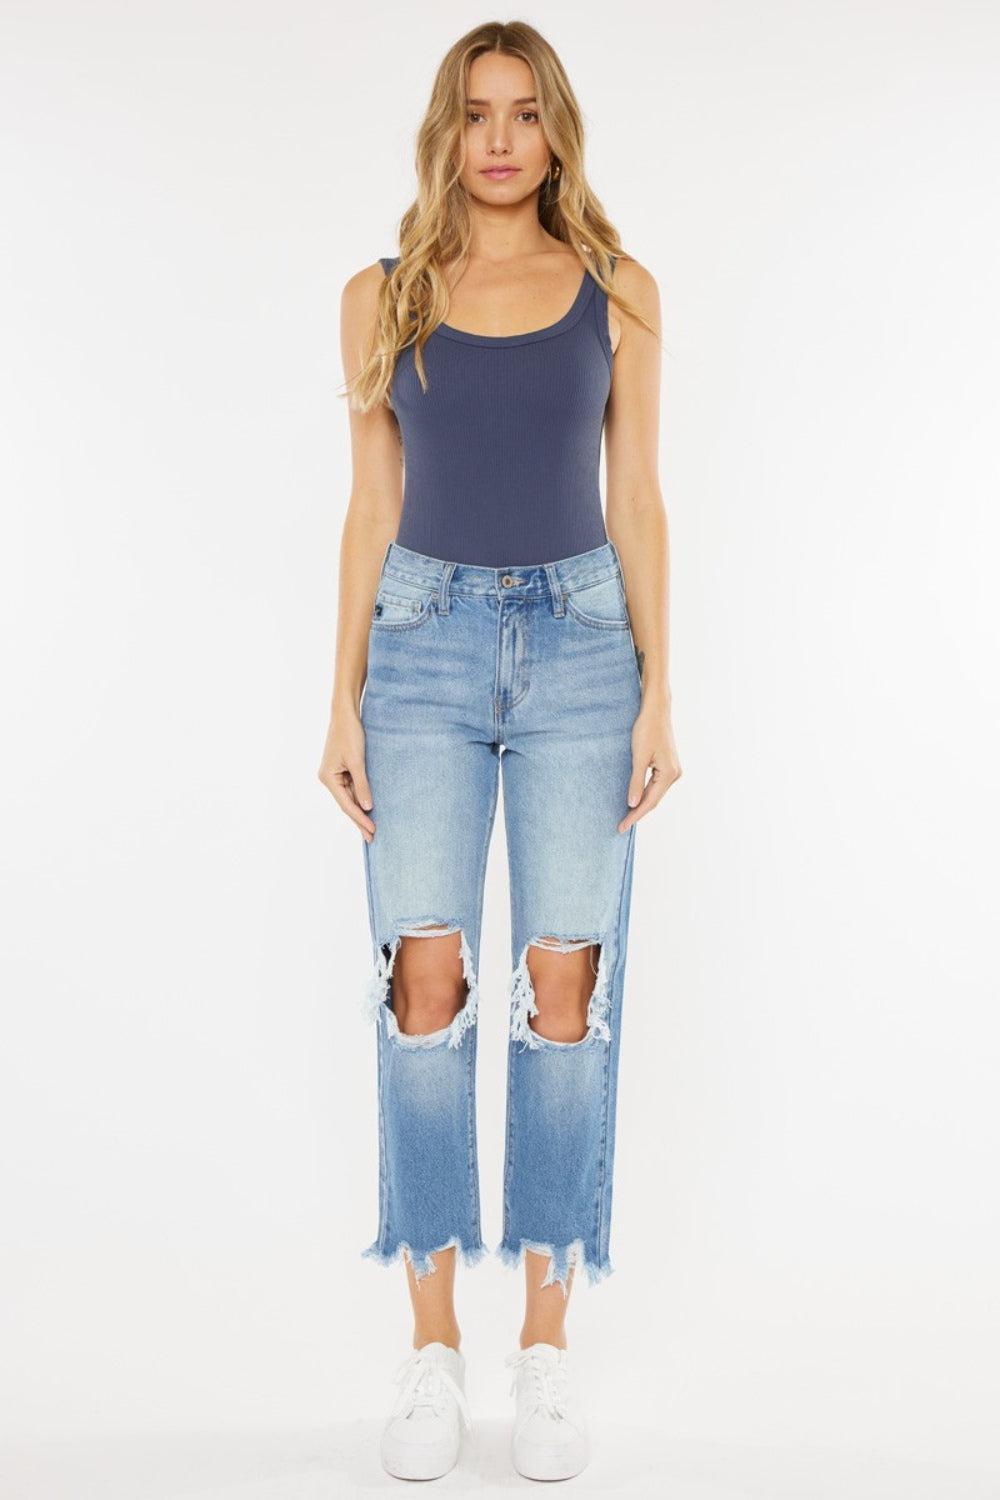 a woman wearing a blue tank top and ripped jeans